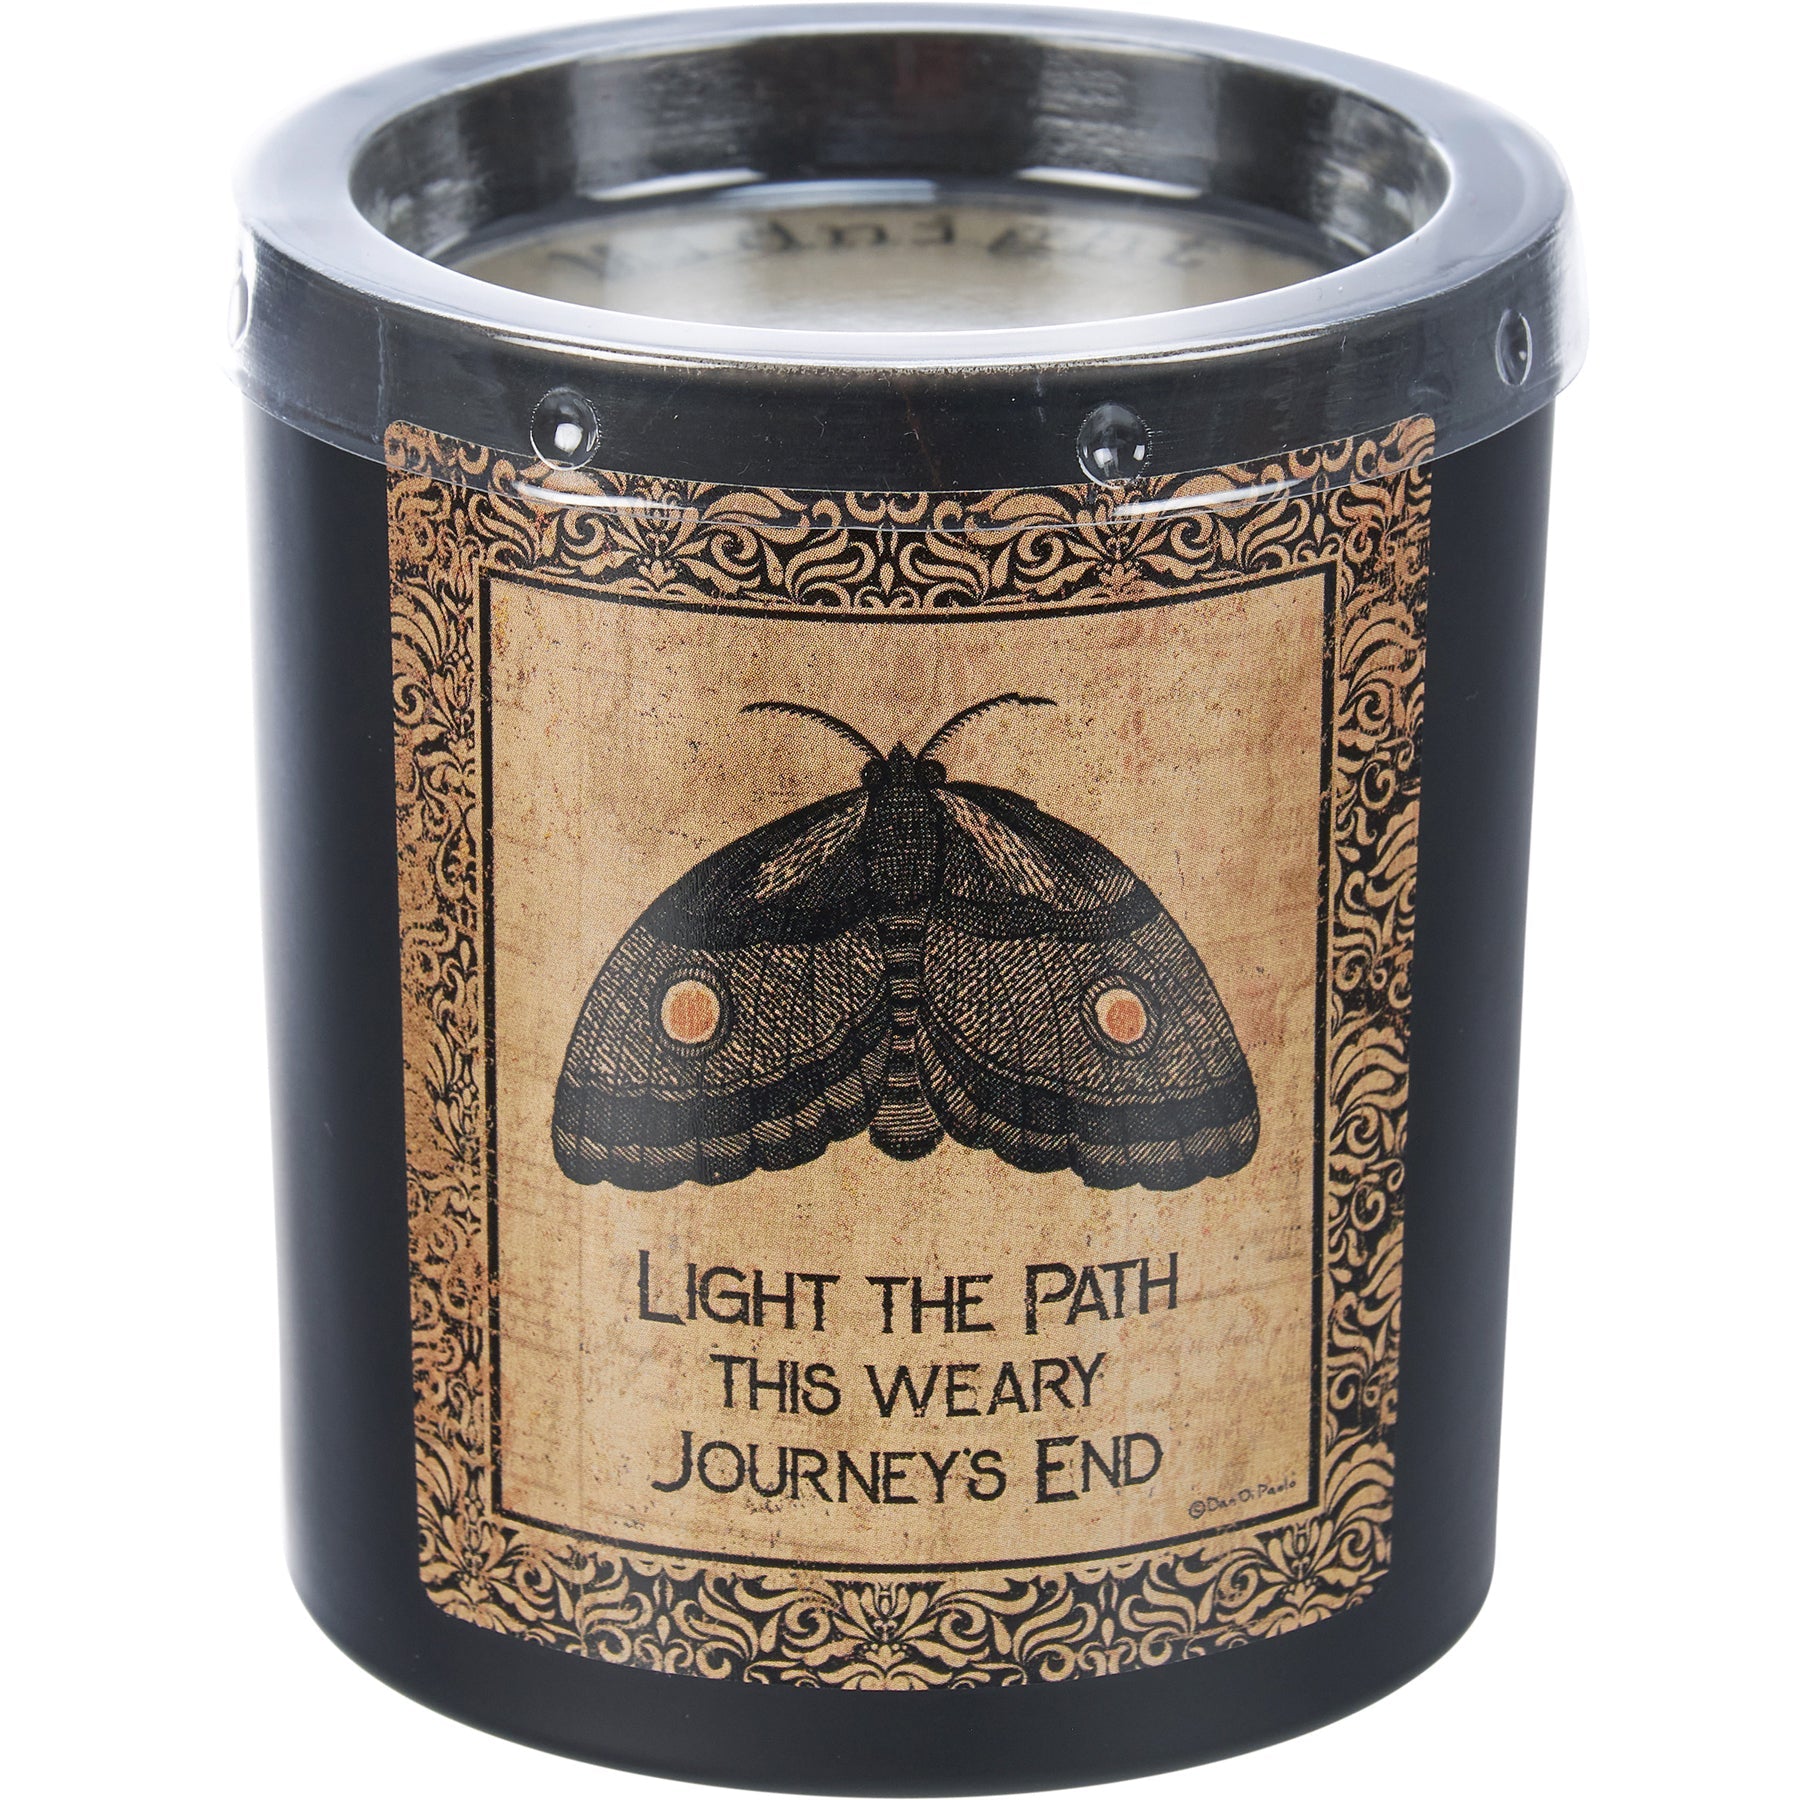 Light The Path Journey's End Jar Candle | Moth in Frosted Black Glass | 35hrs Burn Time